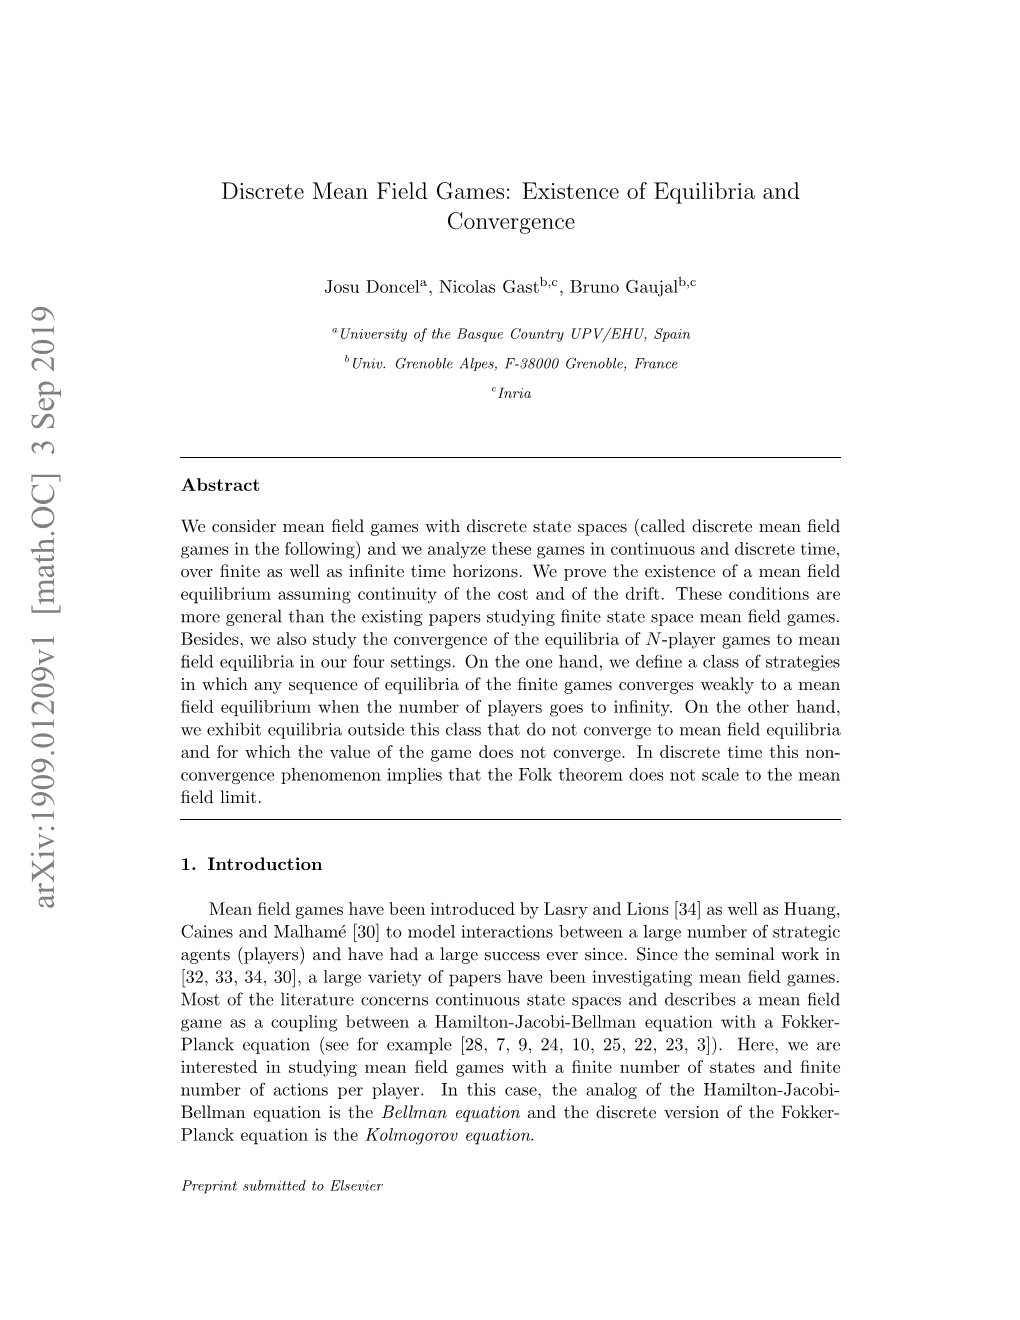 Discrete Mean Field Games: Existence of Equilibria And